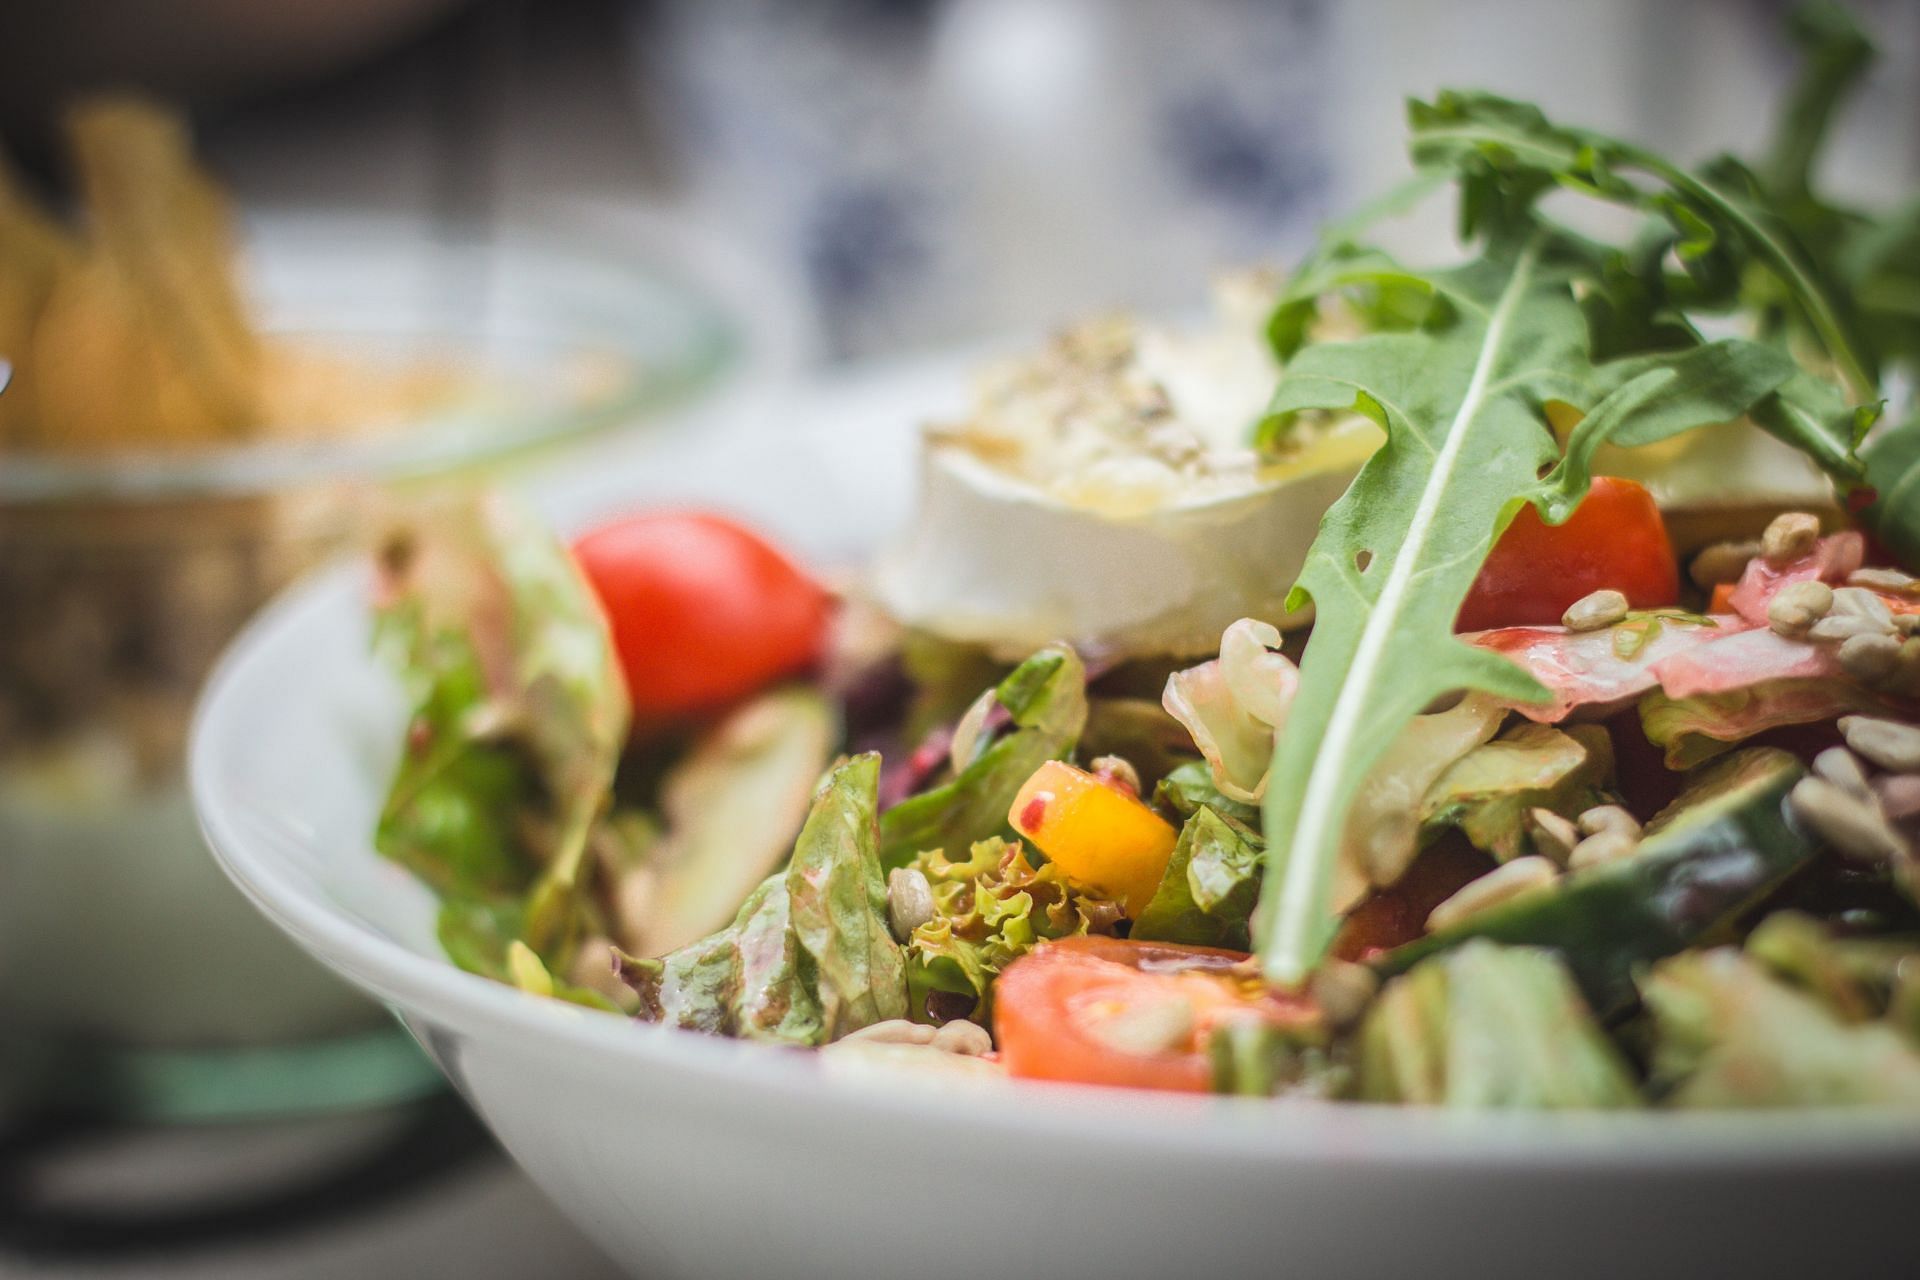 Salad is a healthy side dish to help you on your overall weight loss quest. (Image via Unsplash/ Jasmin Schreiber)